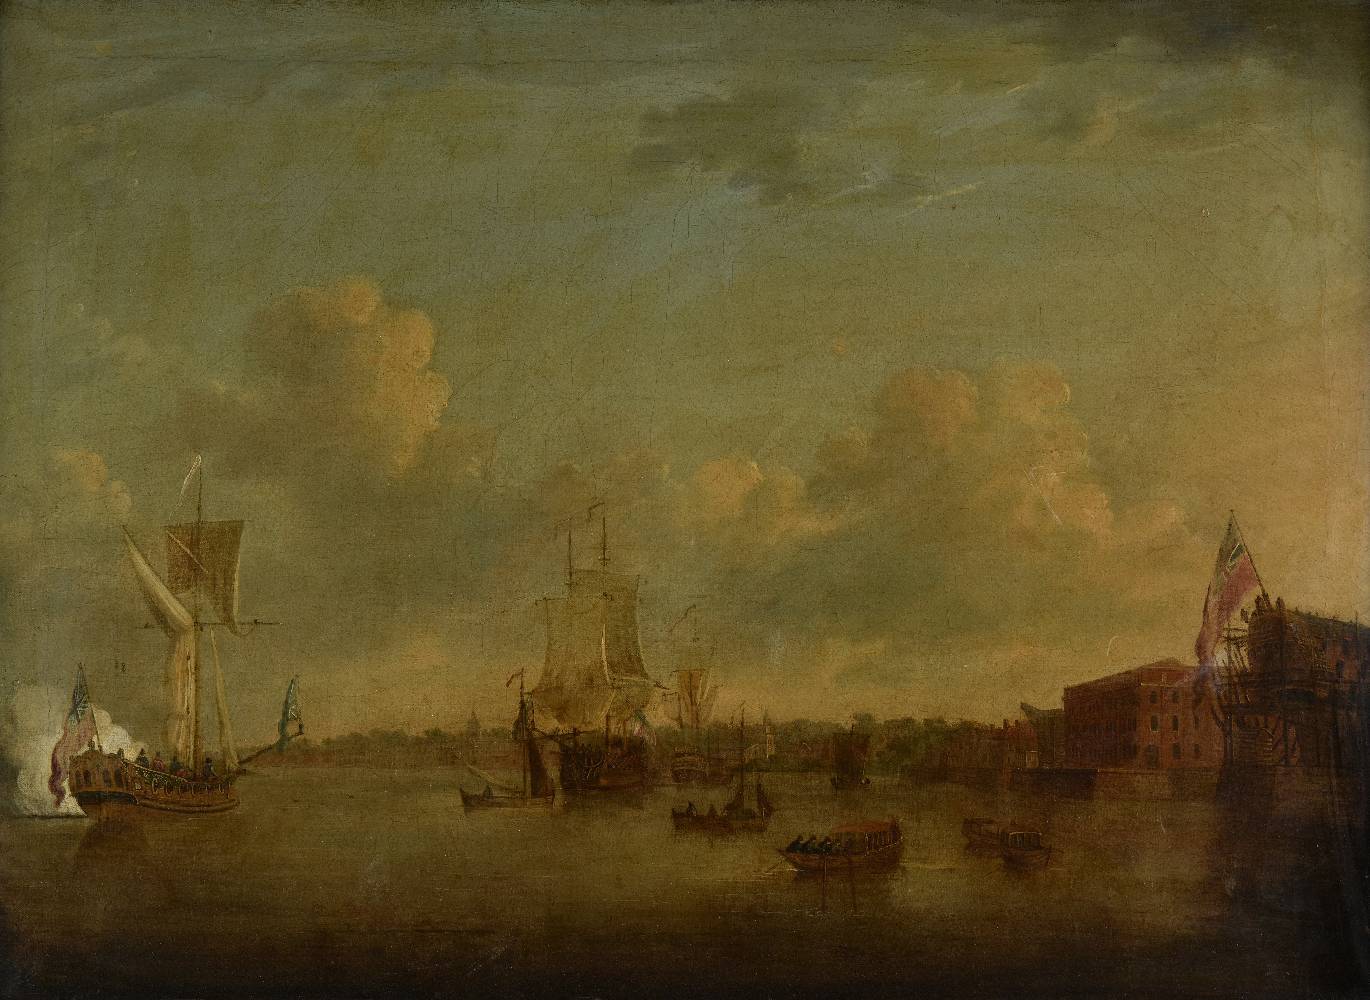 *Attributed to John Cleveley (c.1712-1777). Marine Landscape of Naval ships approaching Greenwich